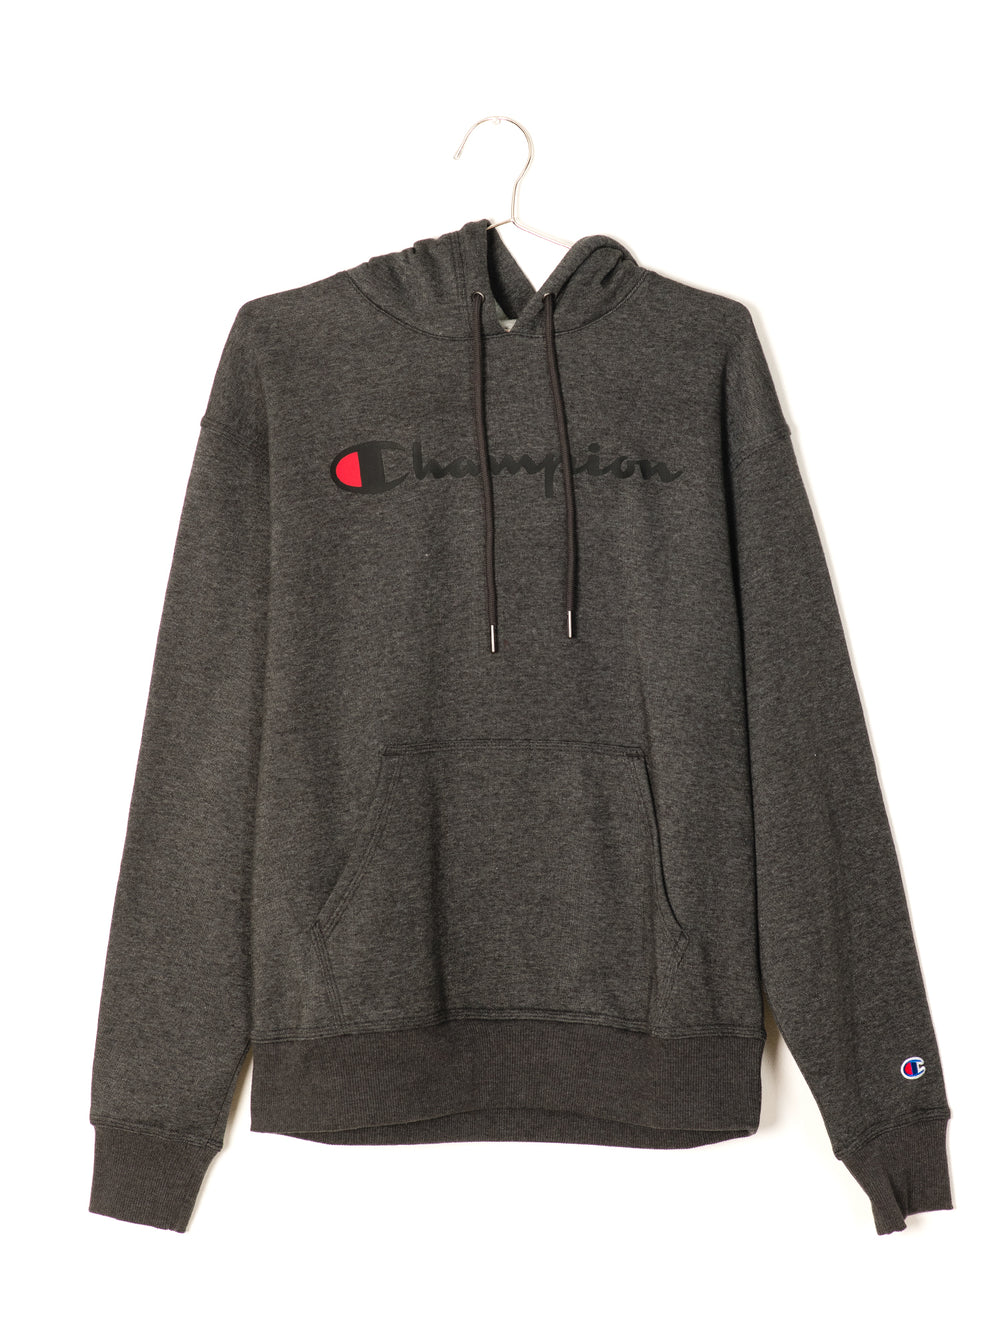 CHAMPION POWERBLEND GRAPHIC PULLOVER SCRIPT HOODIE - CLEARANCE